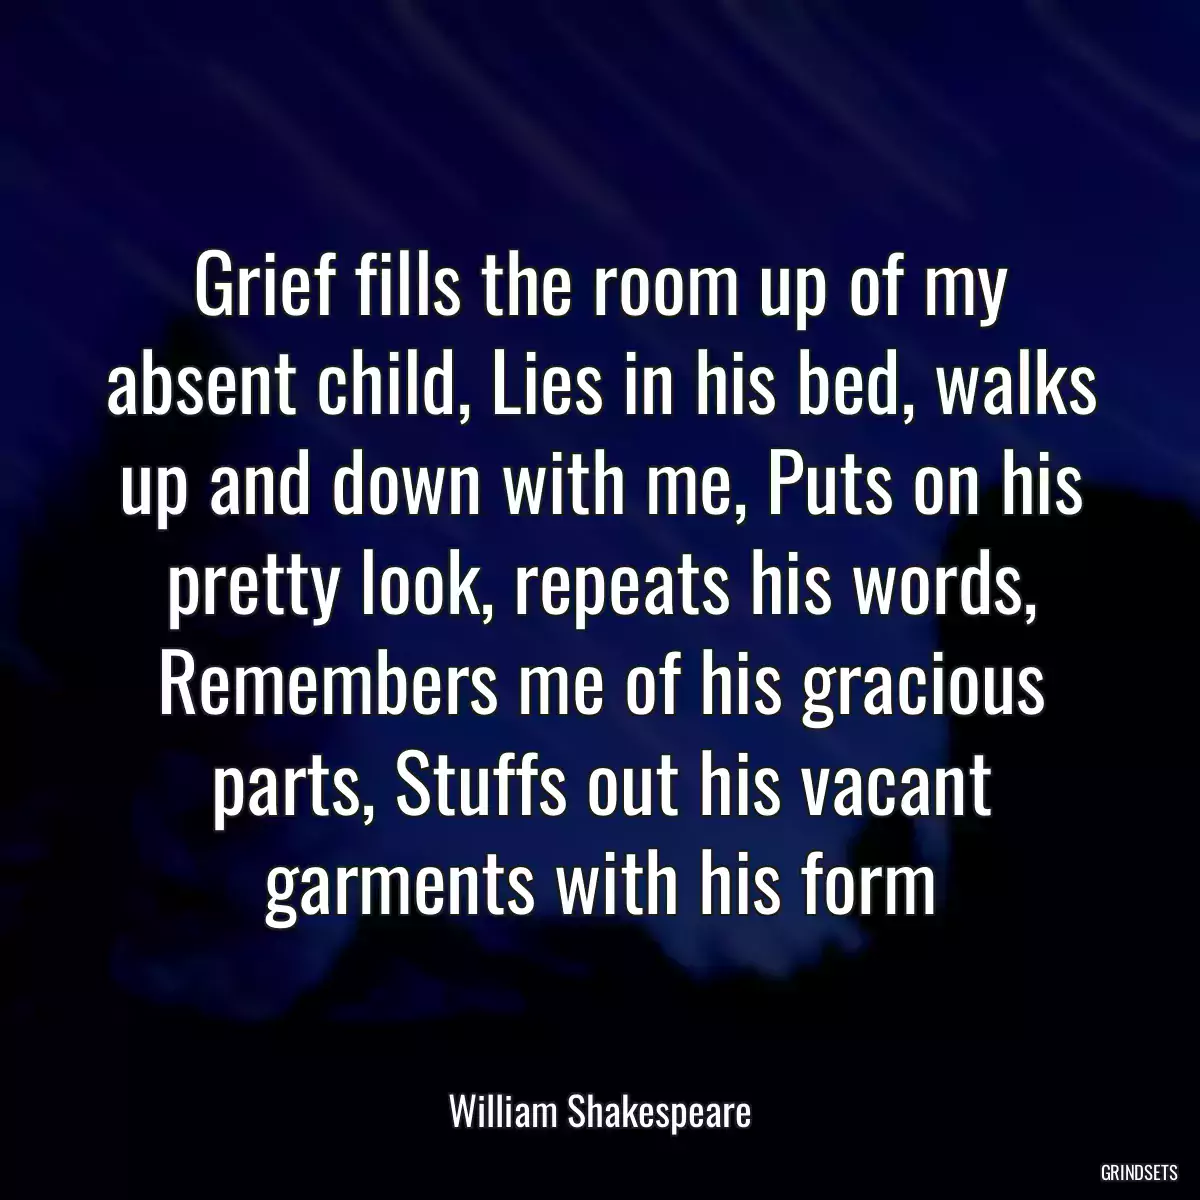 Grief fills the room up of my absent child, Lies in his bed, walks up and down with me, Puts on his pretty look, repeats his words, Remembers me of his gracious parts, Stuffs out his vacant garments with his form